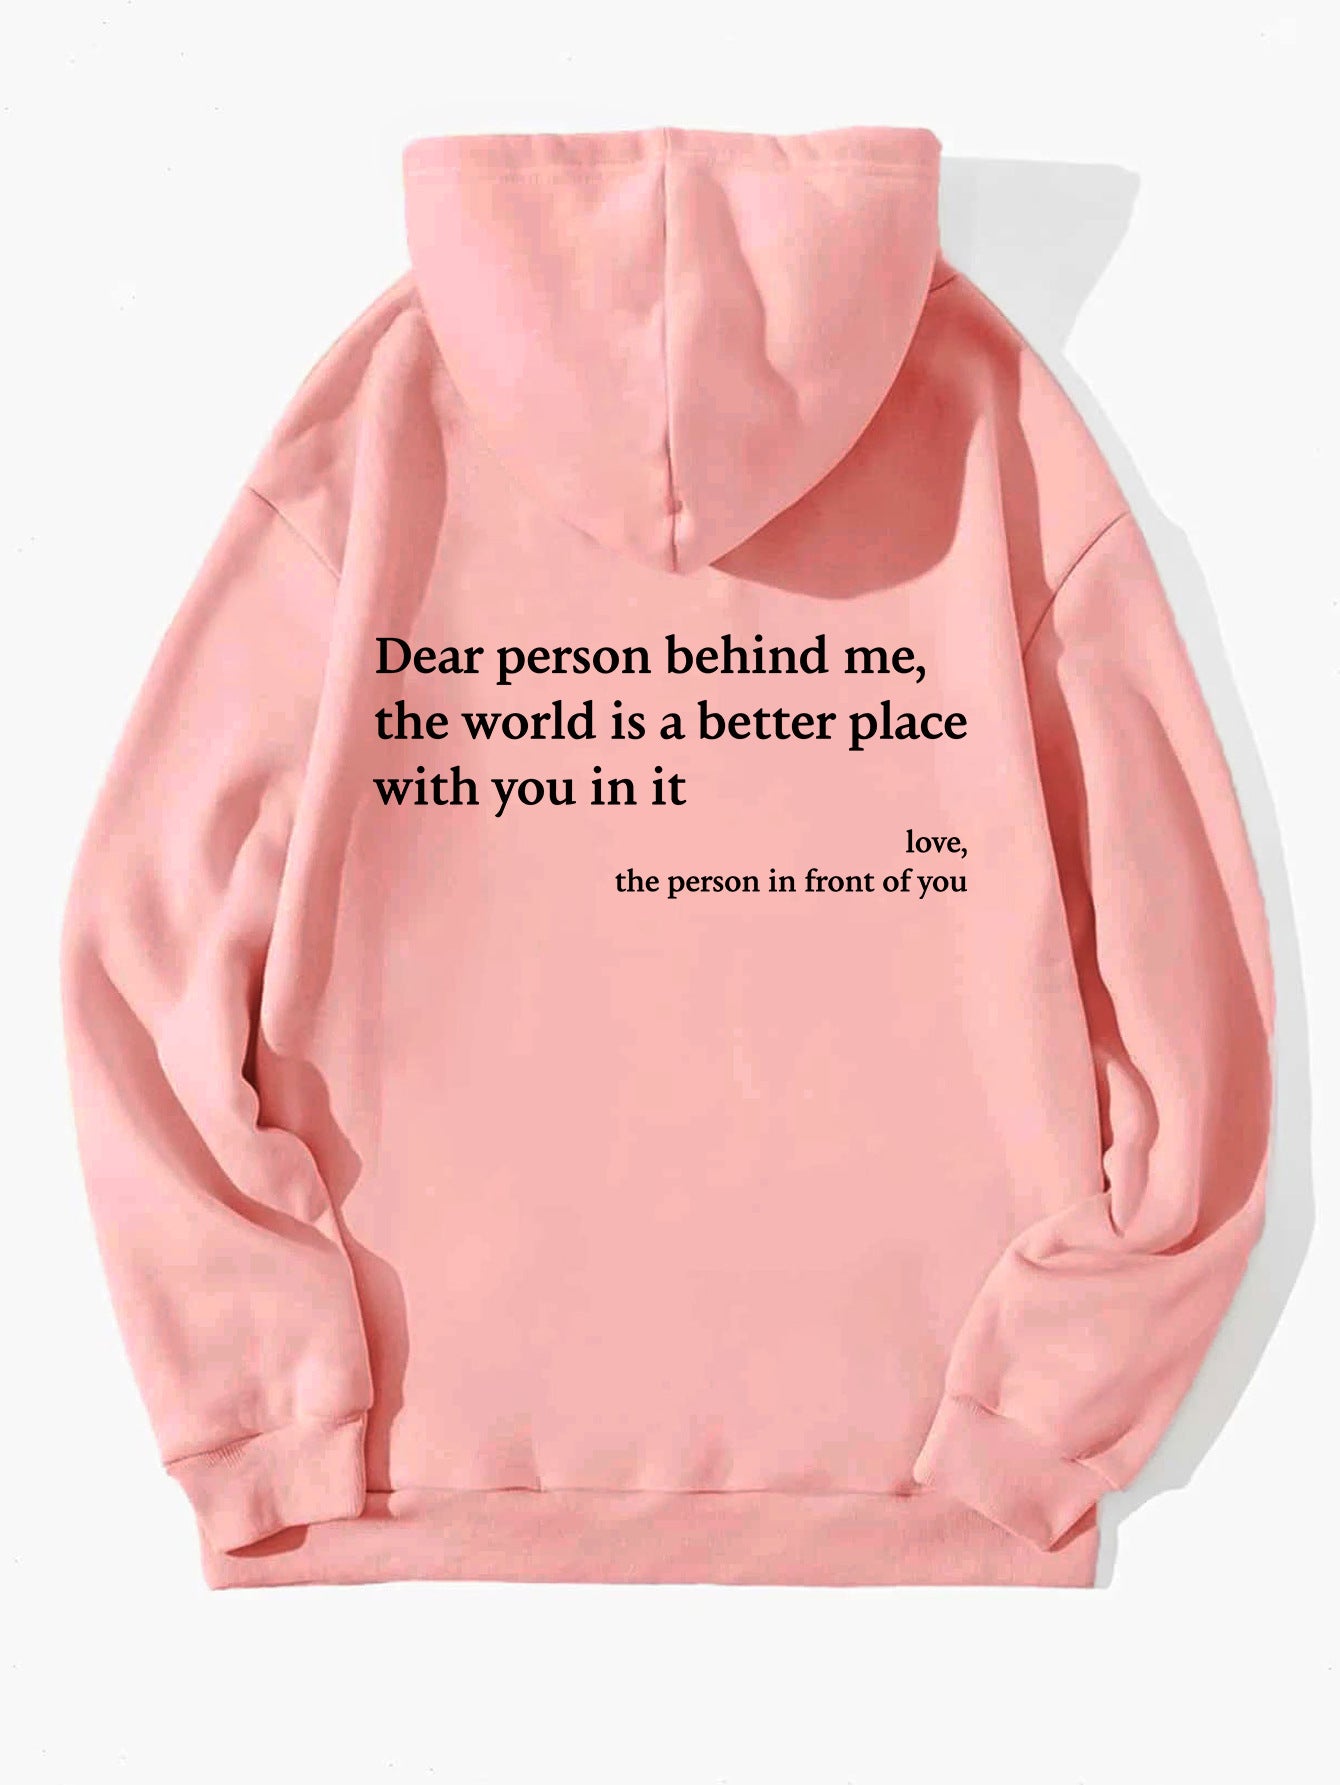 Dear Person Behind Me,the World Is A Better Place,with You In It,love,the Person In Front Of You,Women's Plush Letter Printed Kangaroo Pocket Drawstring Printed Hoodie Unisex Trendy Hoodies - Antoniette Apparel